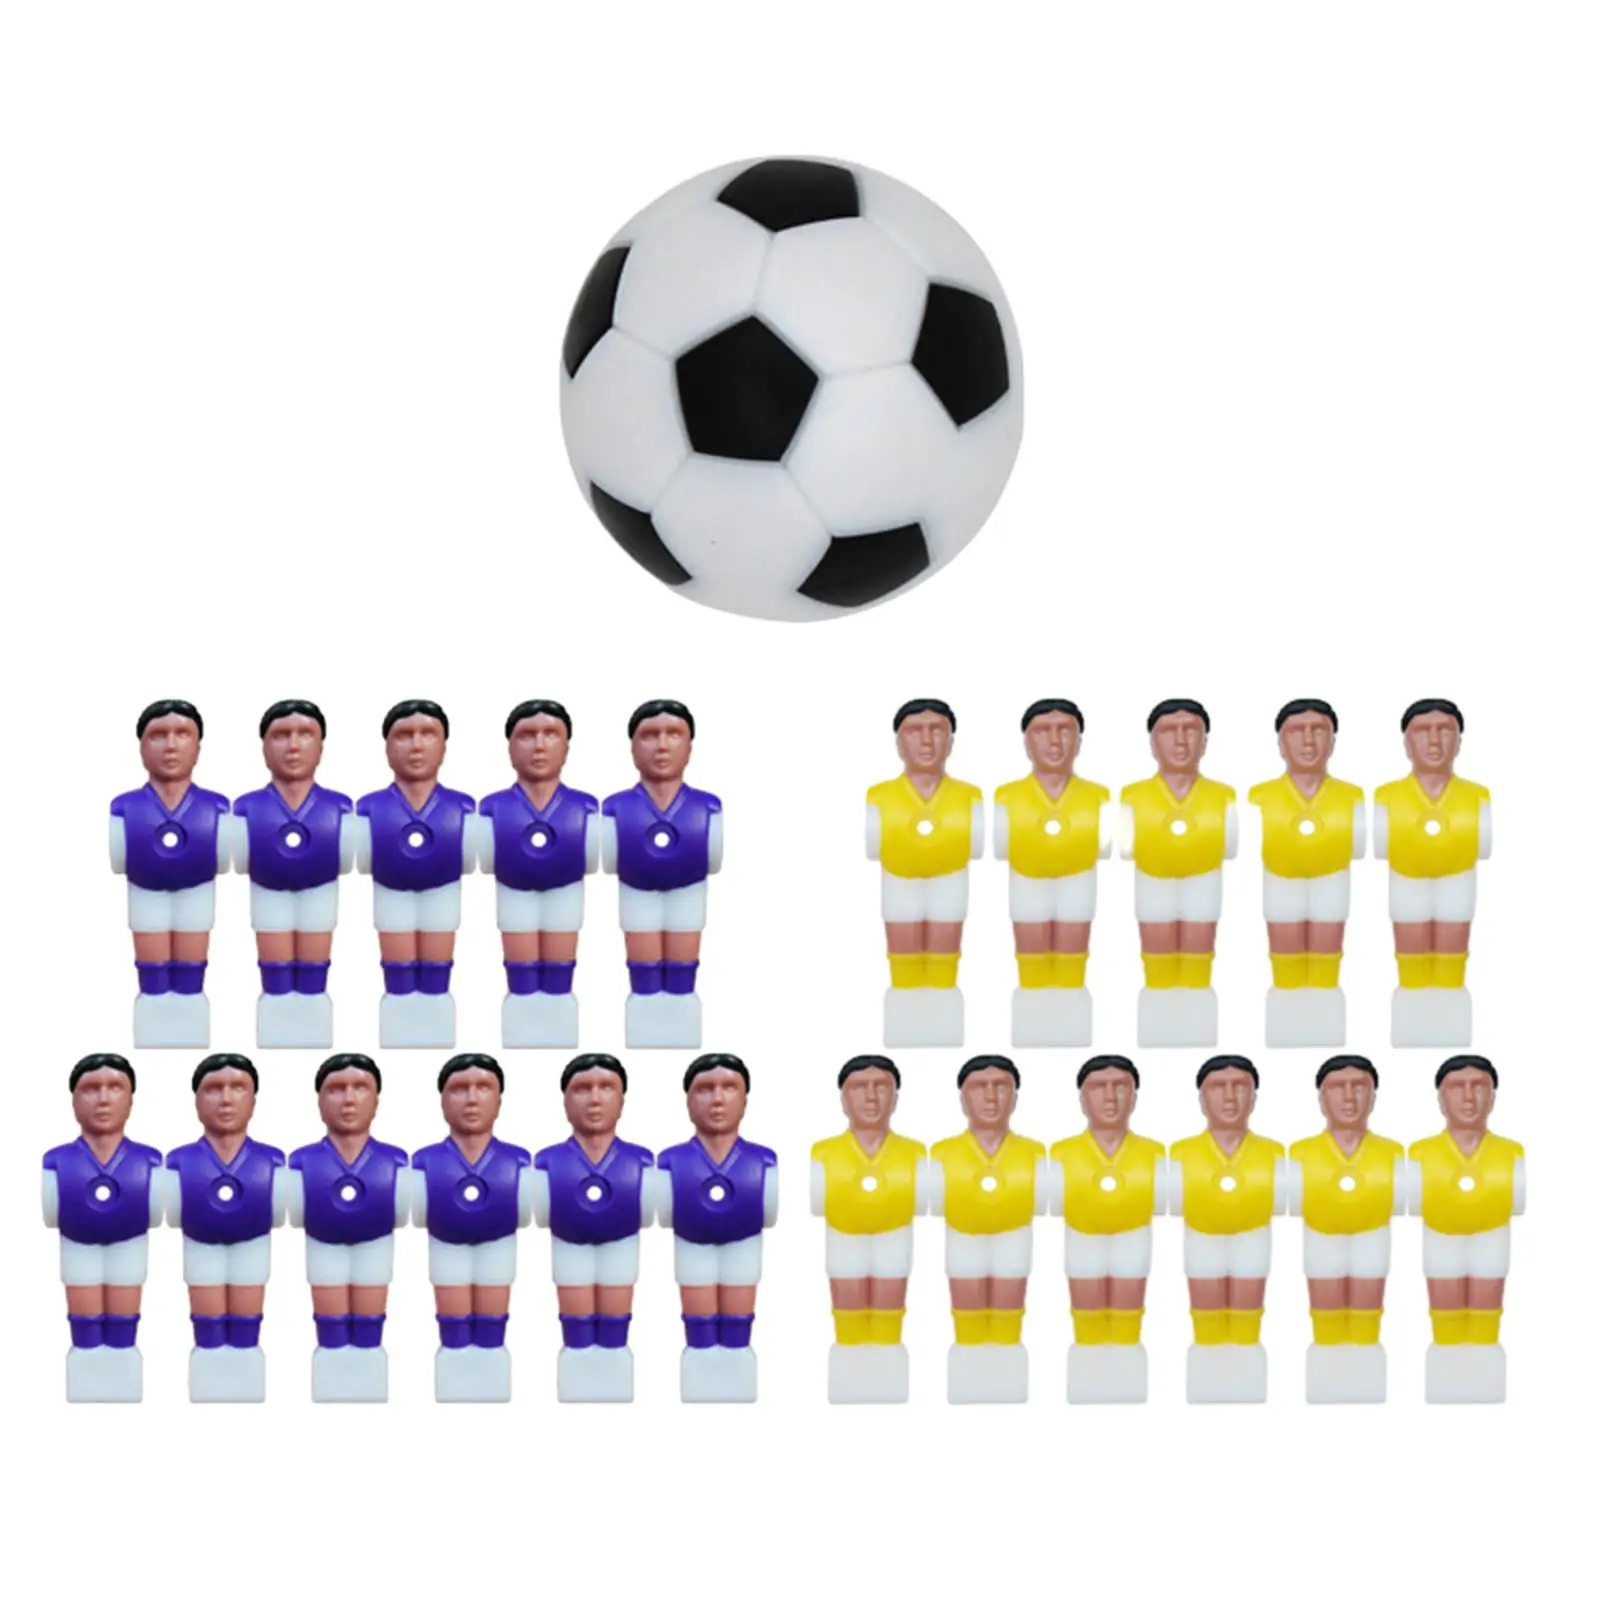 Foosball Table Men Player Foosball Player Soccer Games Table Foosball Player Replacement Parts Table Football Men Foosball Men